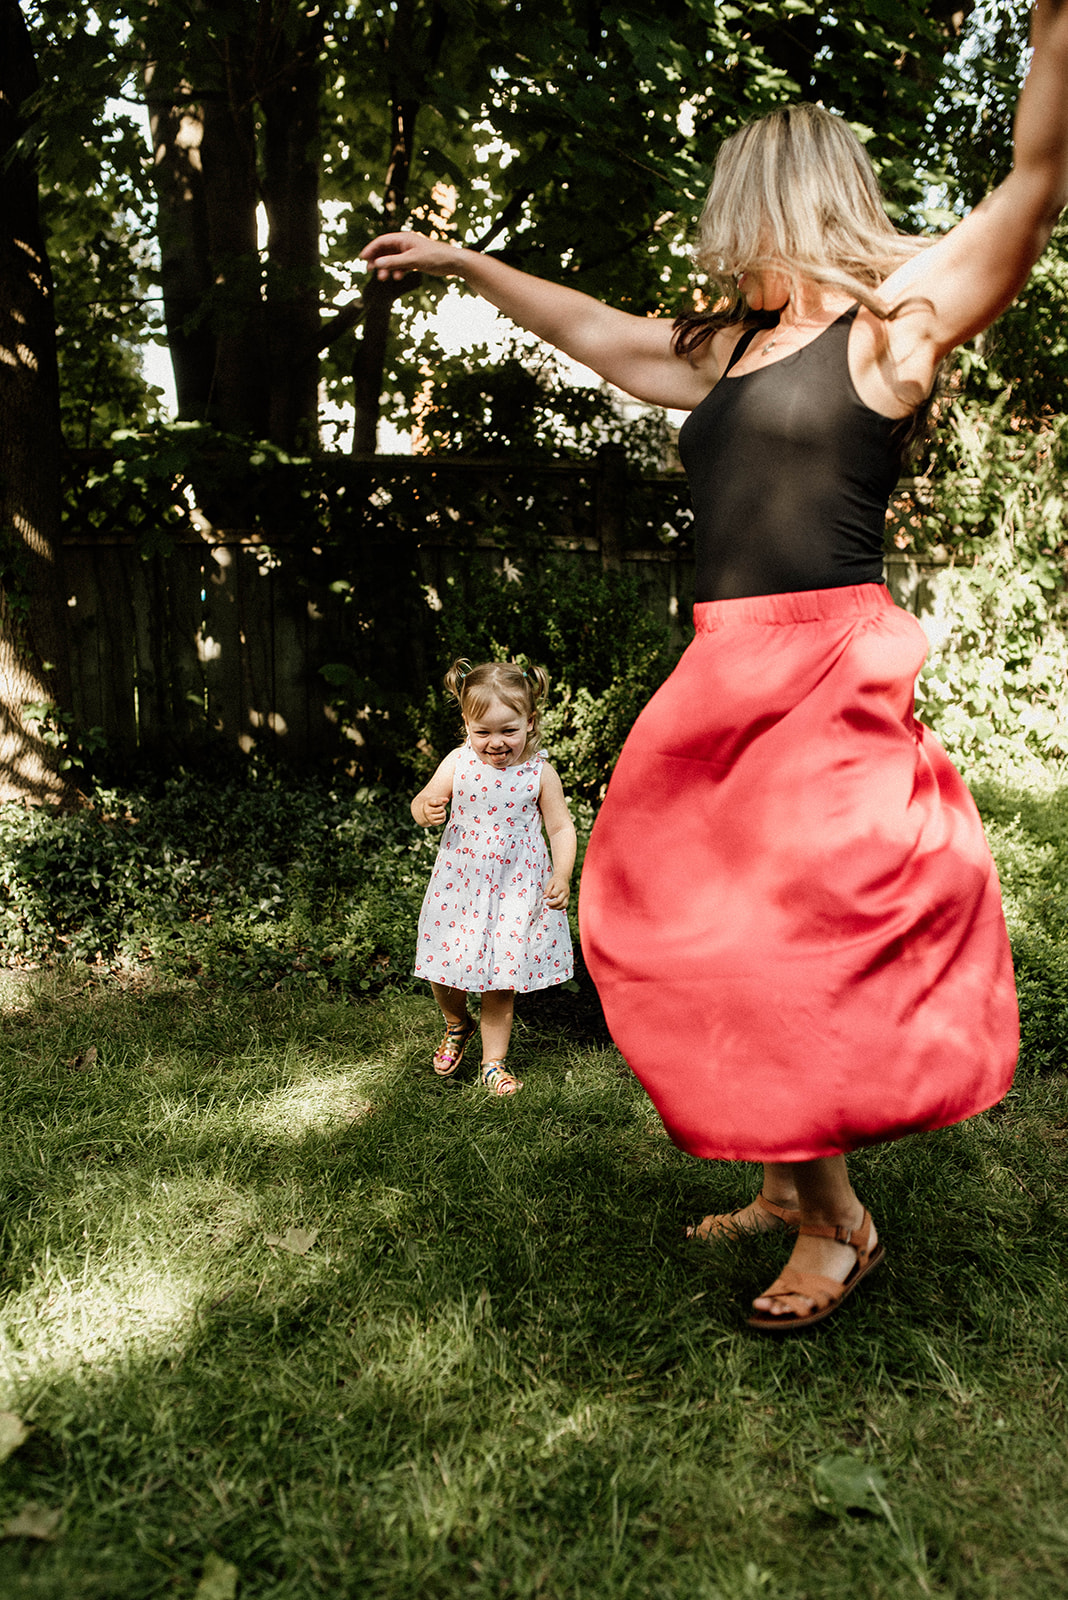 Mommy and daughter dancing in the backyard